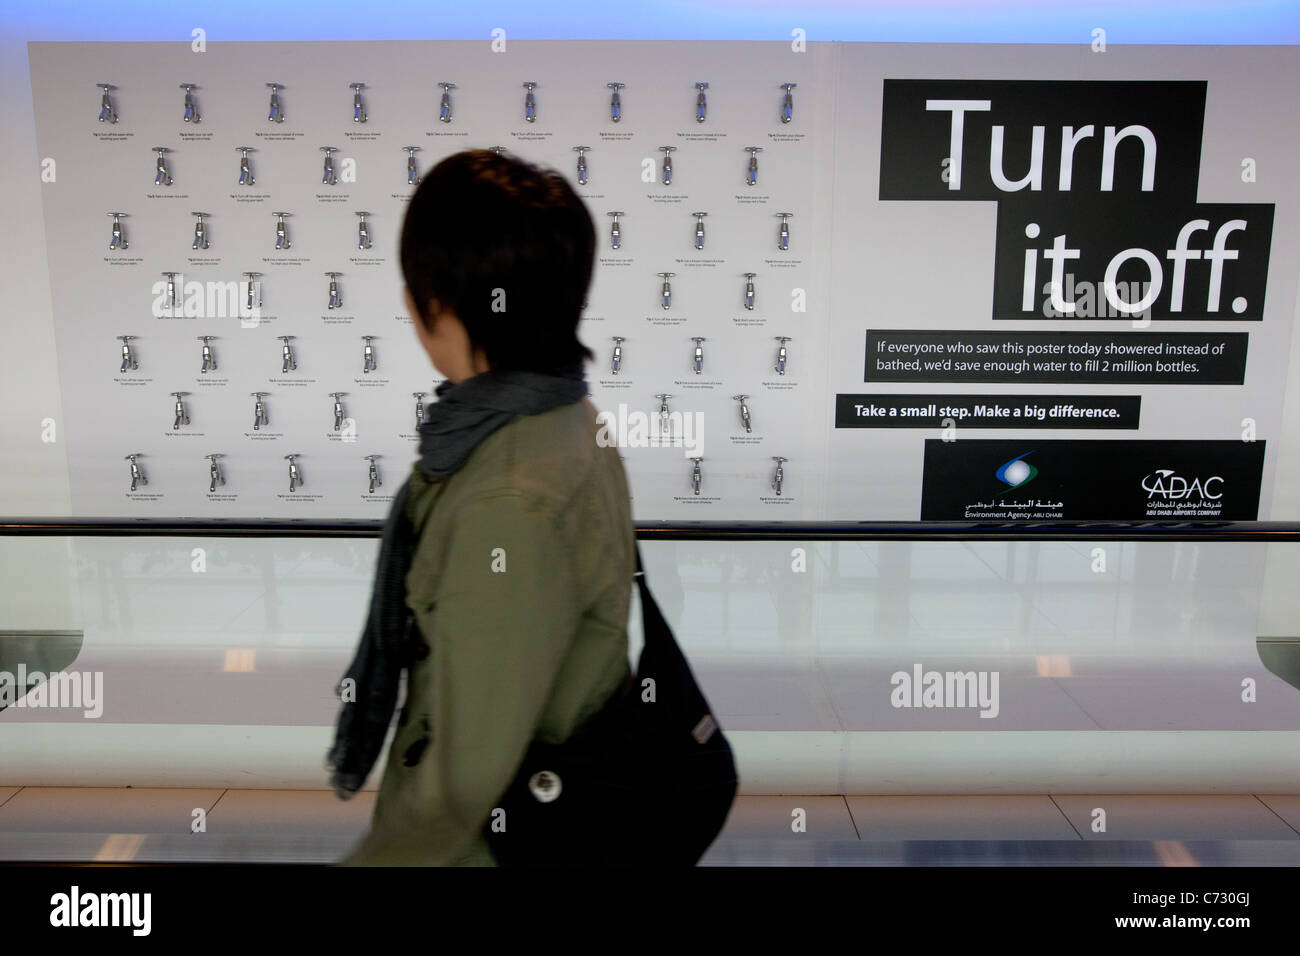 Adverts requesting the turning off of water taps to conserve water supplies, in Abu Dhabi airport, in the United Arab Emirates, Stock Photo